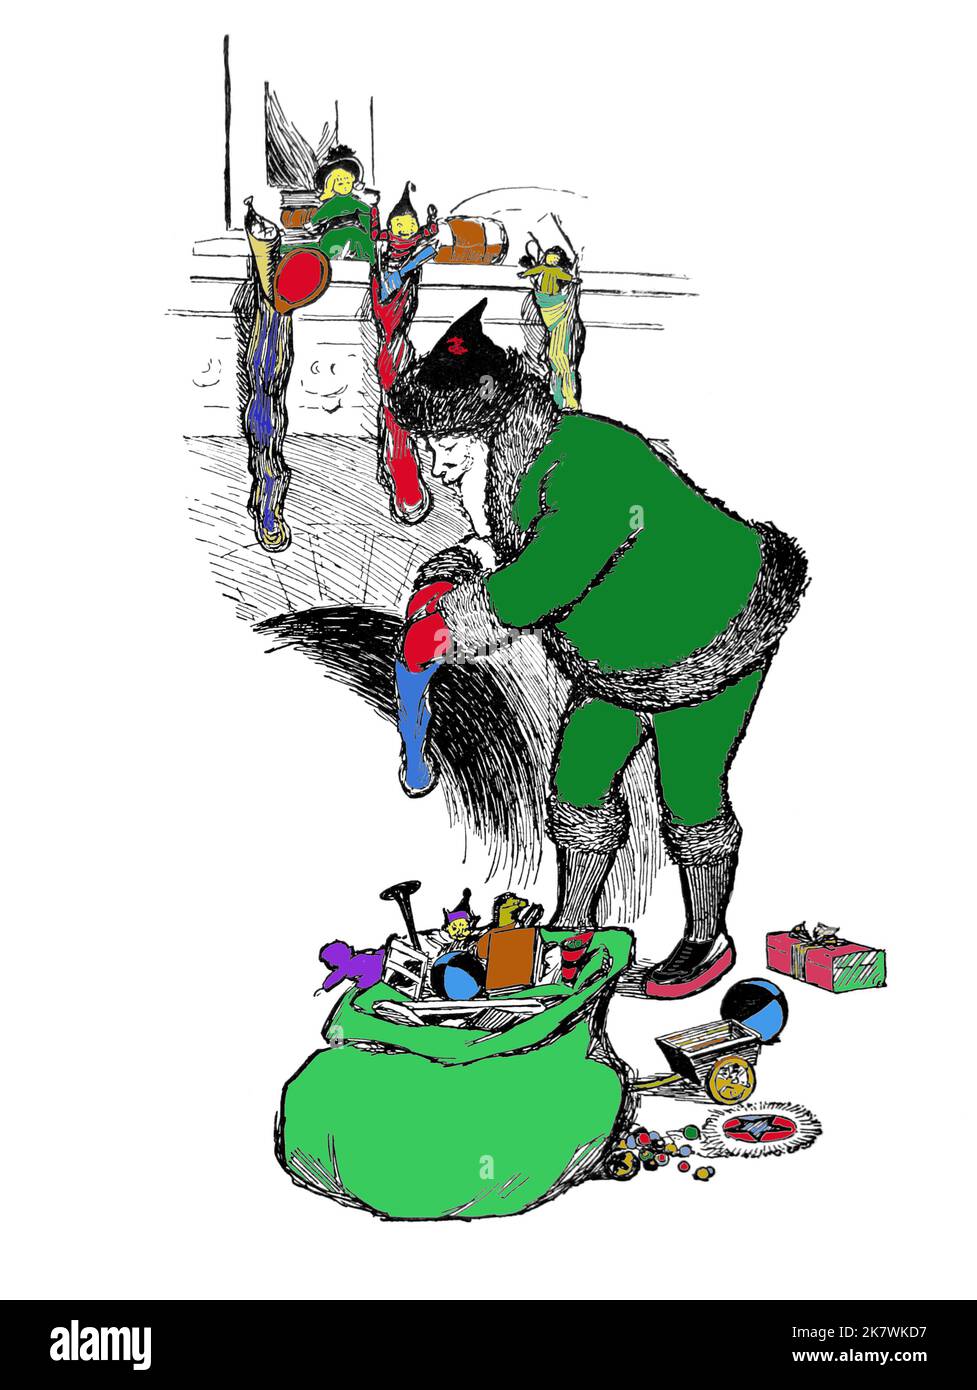 Colorful, Green Suit Santa with a bag of gifts, standing at the chimney where socks are hung. Old fashion, vintage illustration. Stock Photo